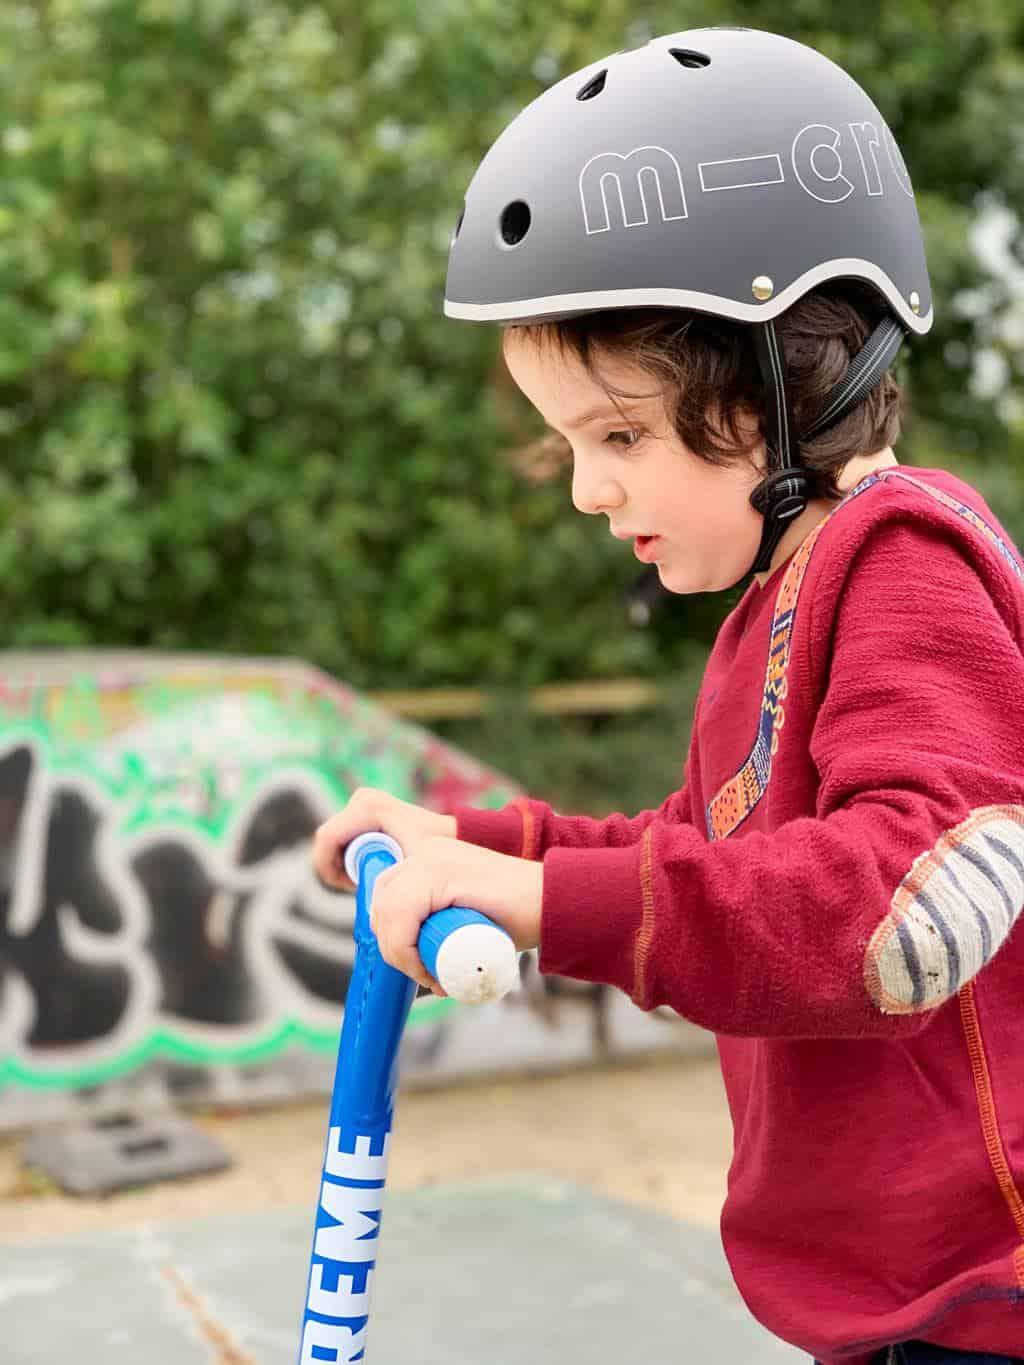 Introducing MX Trixx {the best trick scooter for a 6 year old}